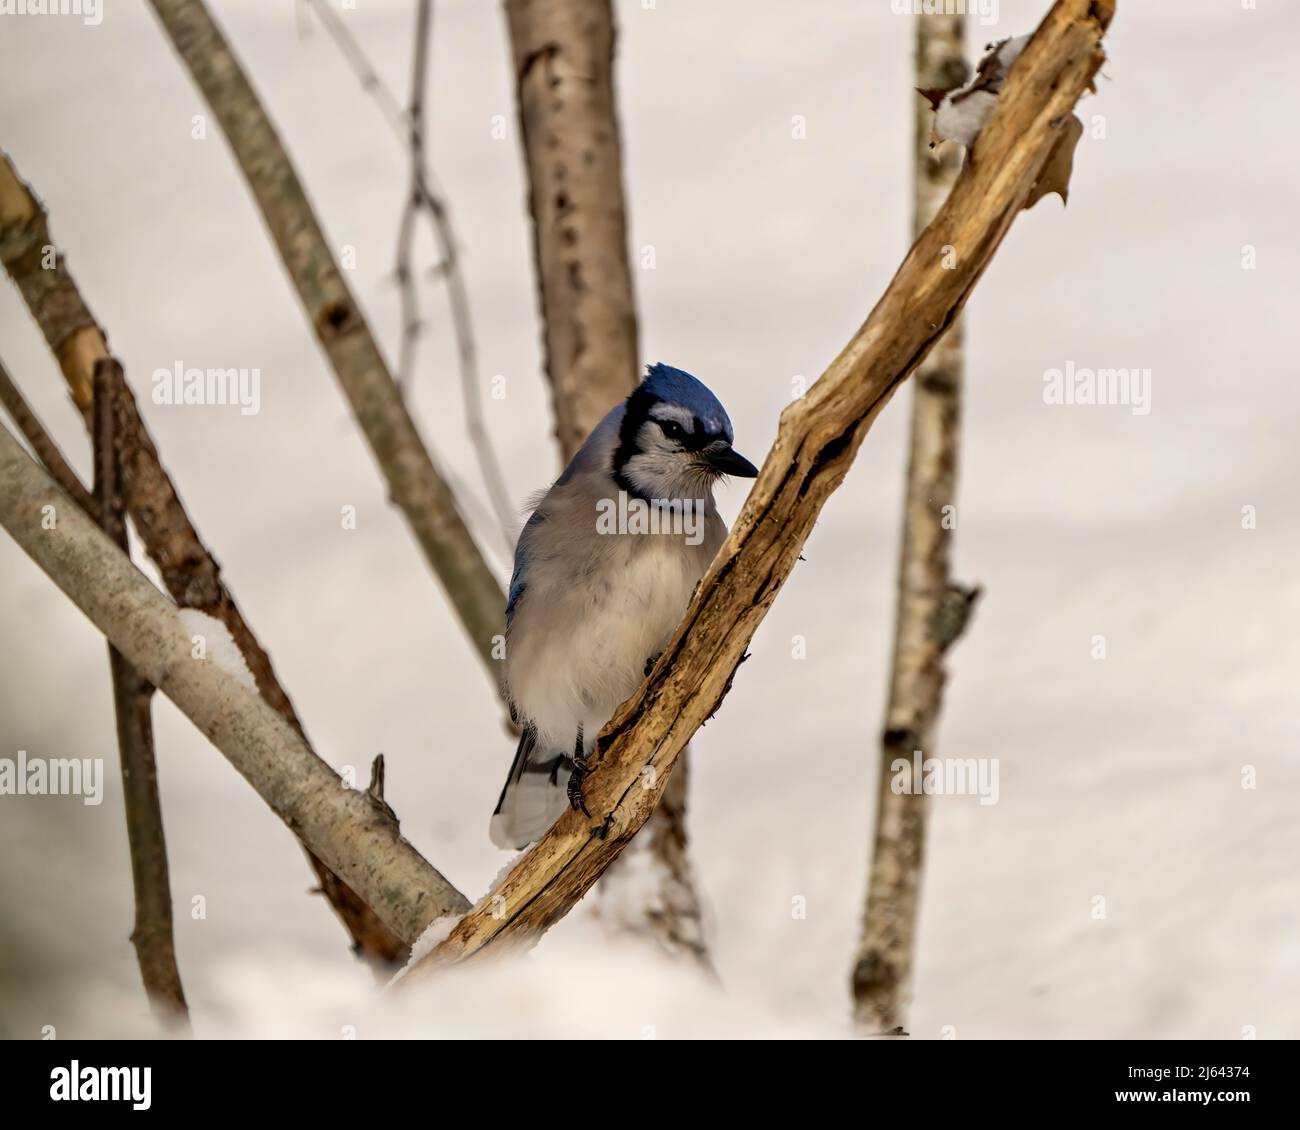 Blue Jay bird close-up perched on a branch with a blur forest background in the winter season environment and habitat displaying blue feather plumage. Stock Photo